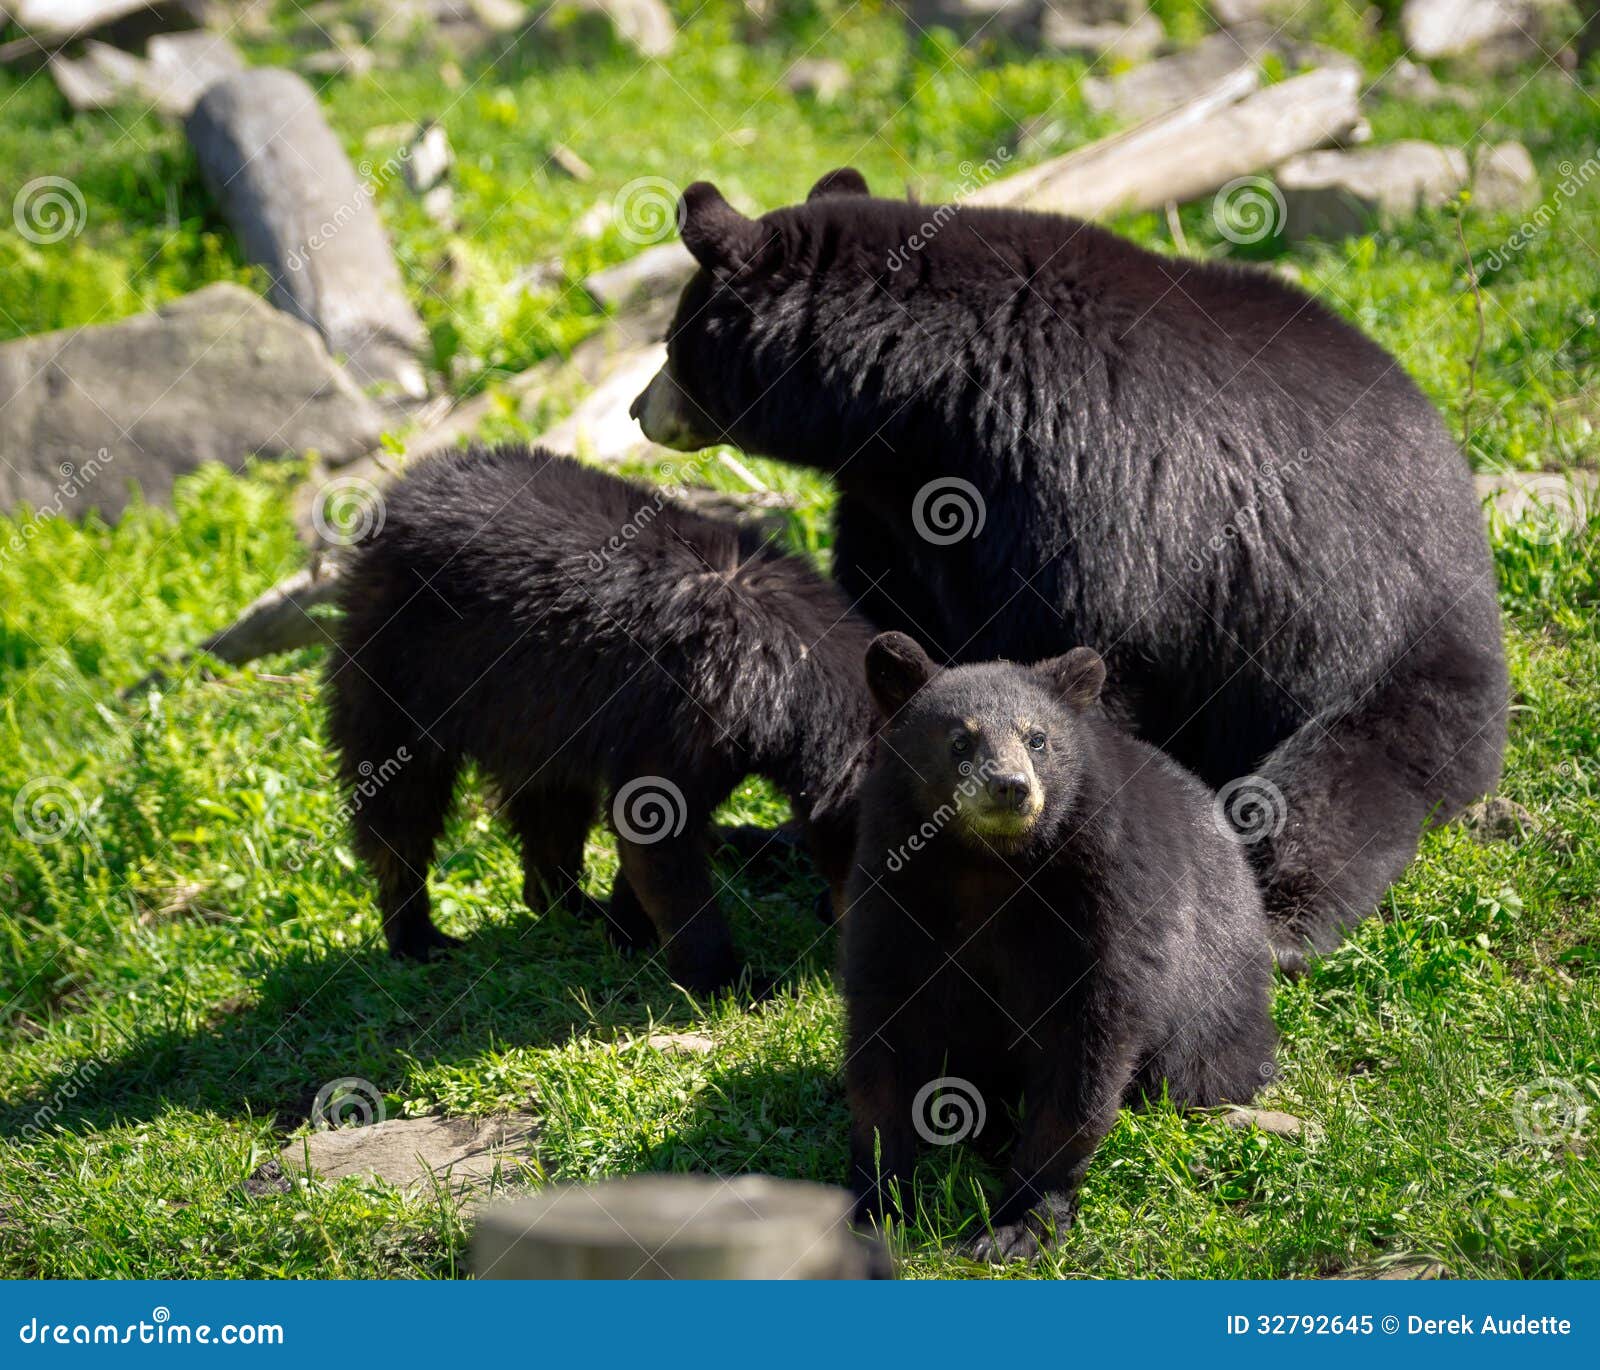 three black bears - mother and two cubs